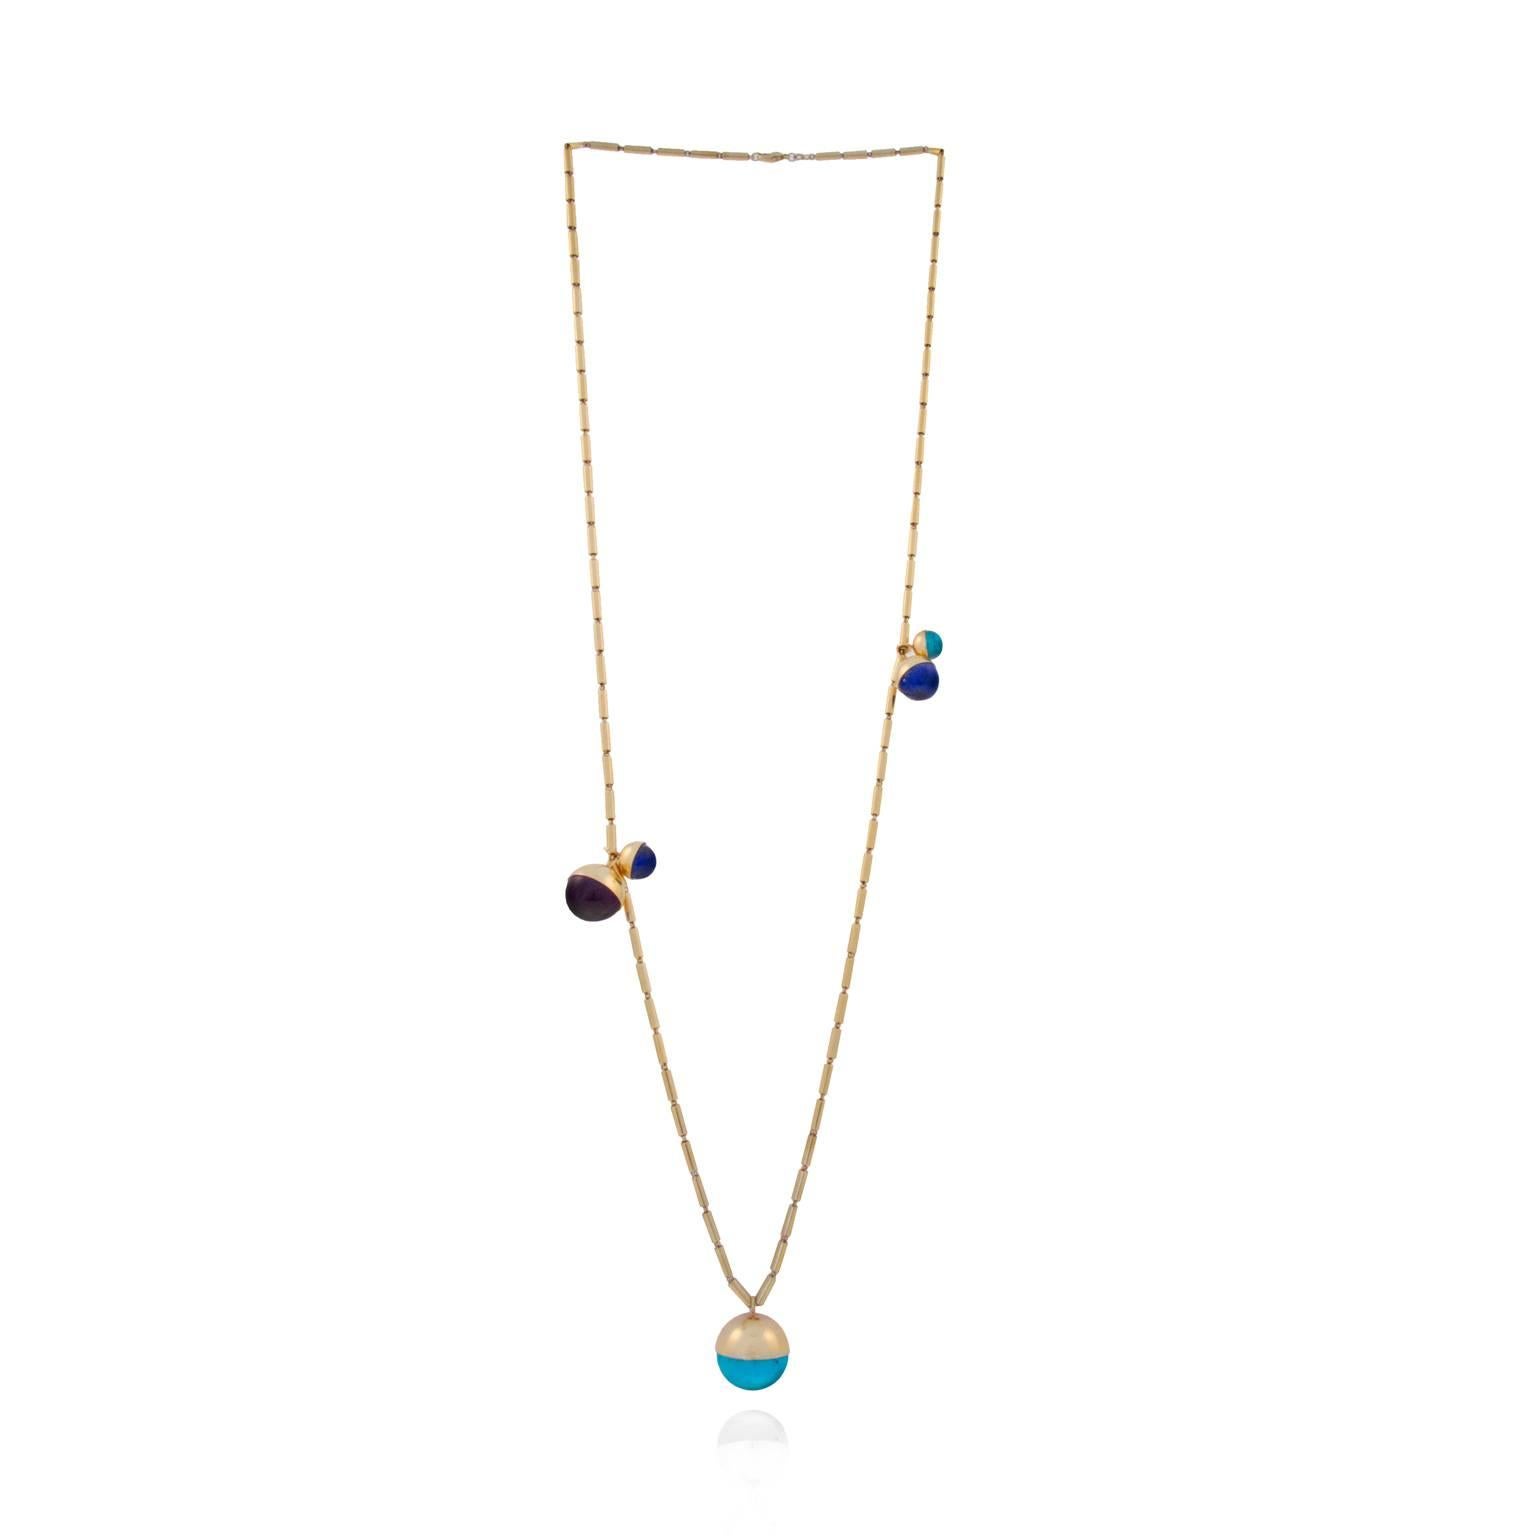 A solar system in miniature, the Five Planets necklace comprises precious spheres in a spectrum of sizes. Lapis Lazuli, turquoise and amethyst orbit move freely around the neck on an 18ct rose gold stick chain, which is 90cm long and 3mm in